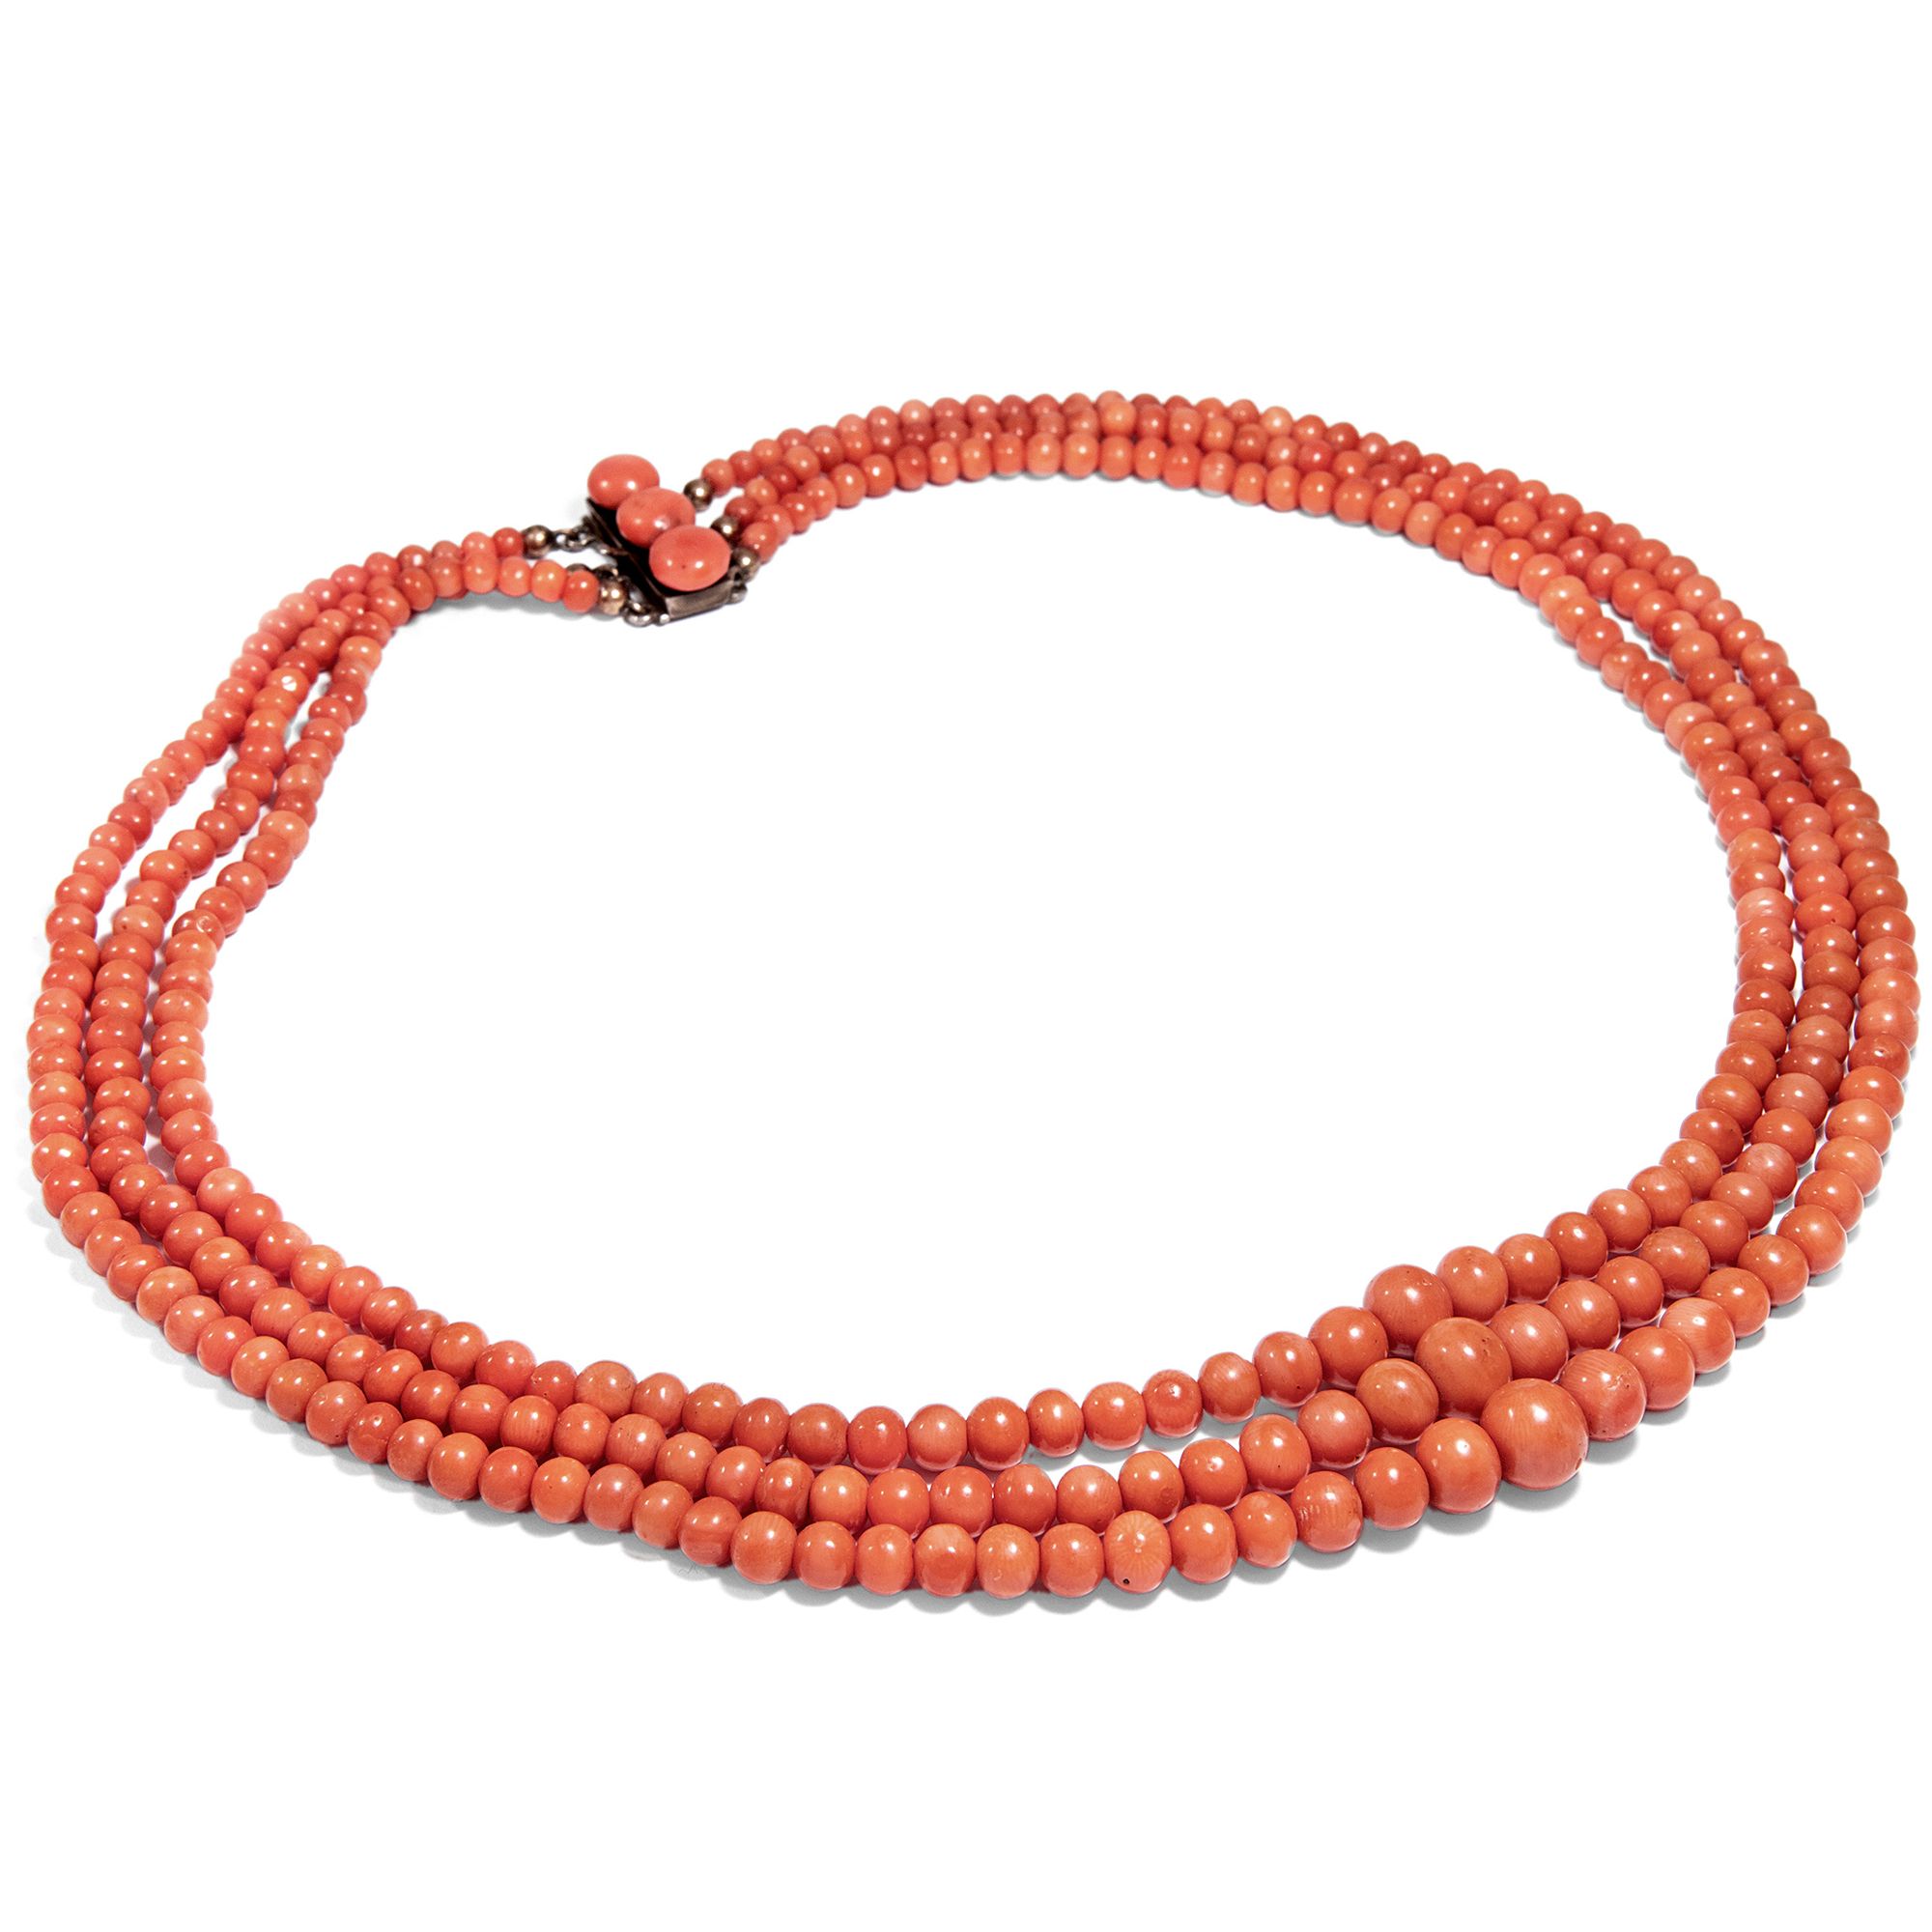 Antique Necklace Made of Three Rows of Salmon-Coloured Mediterranean Coral, Italy ca. 1900